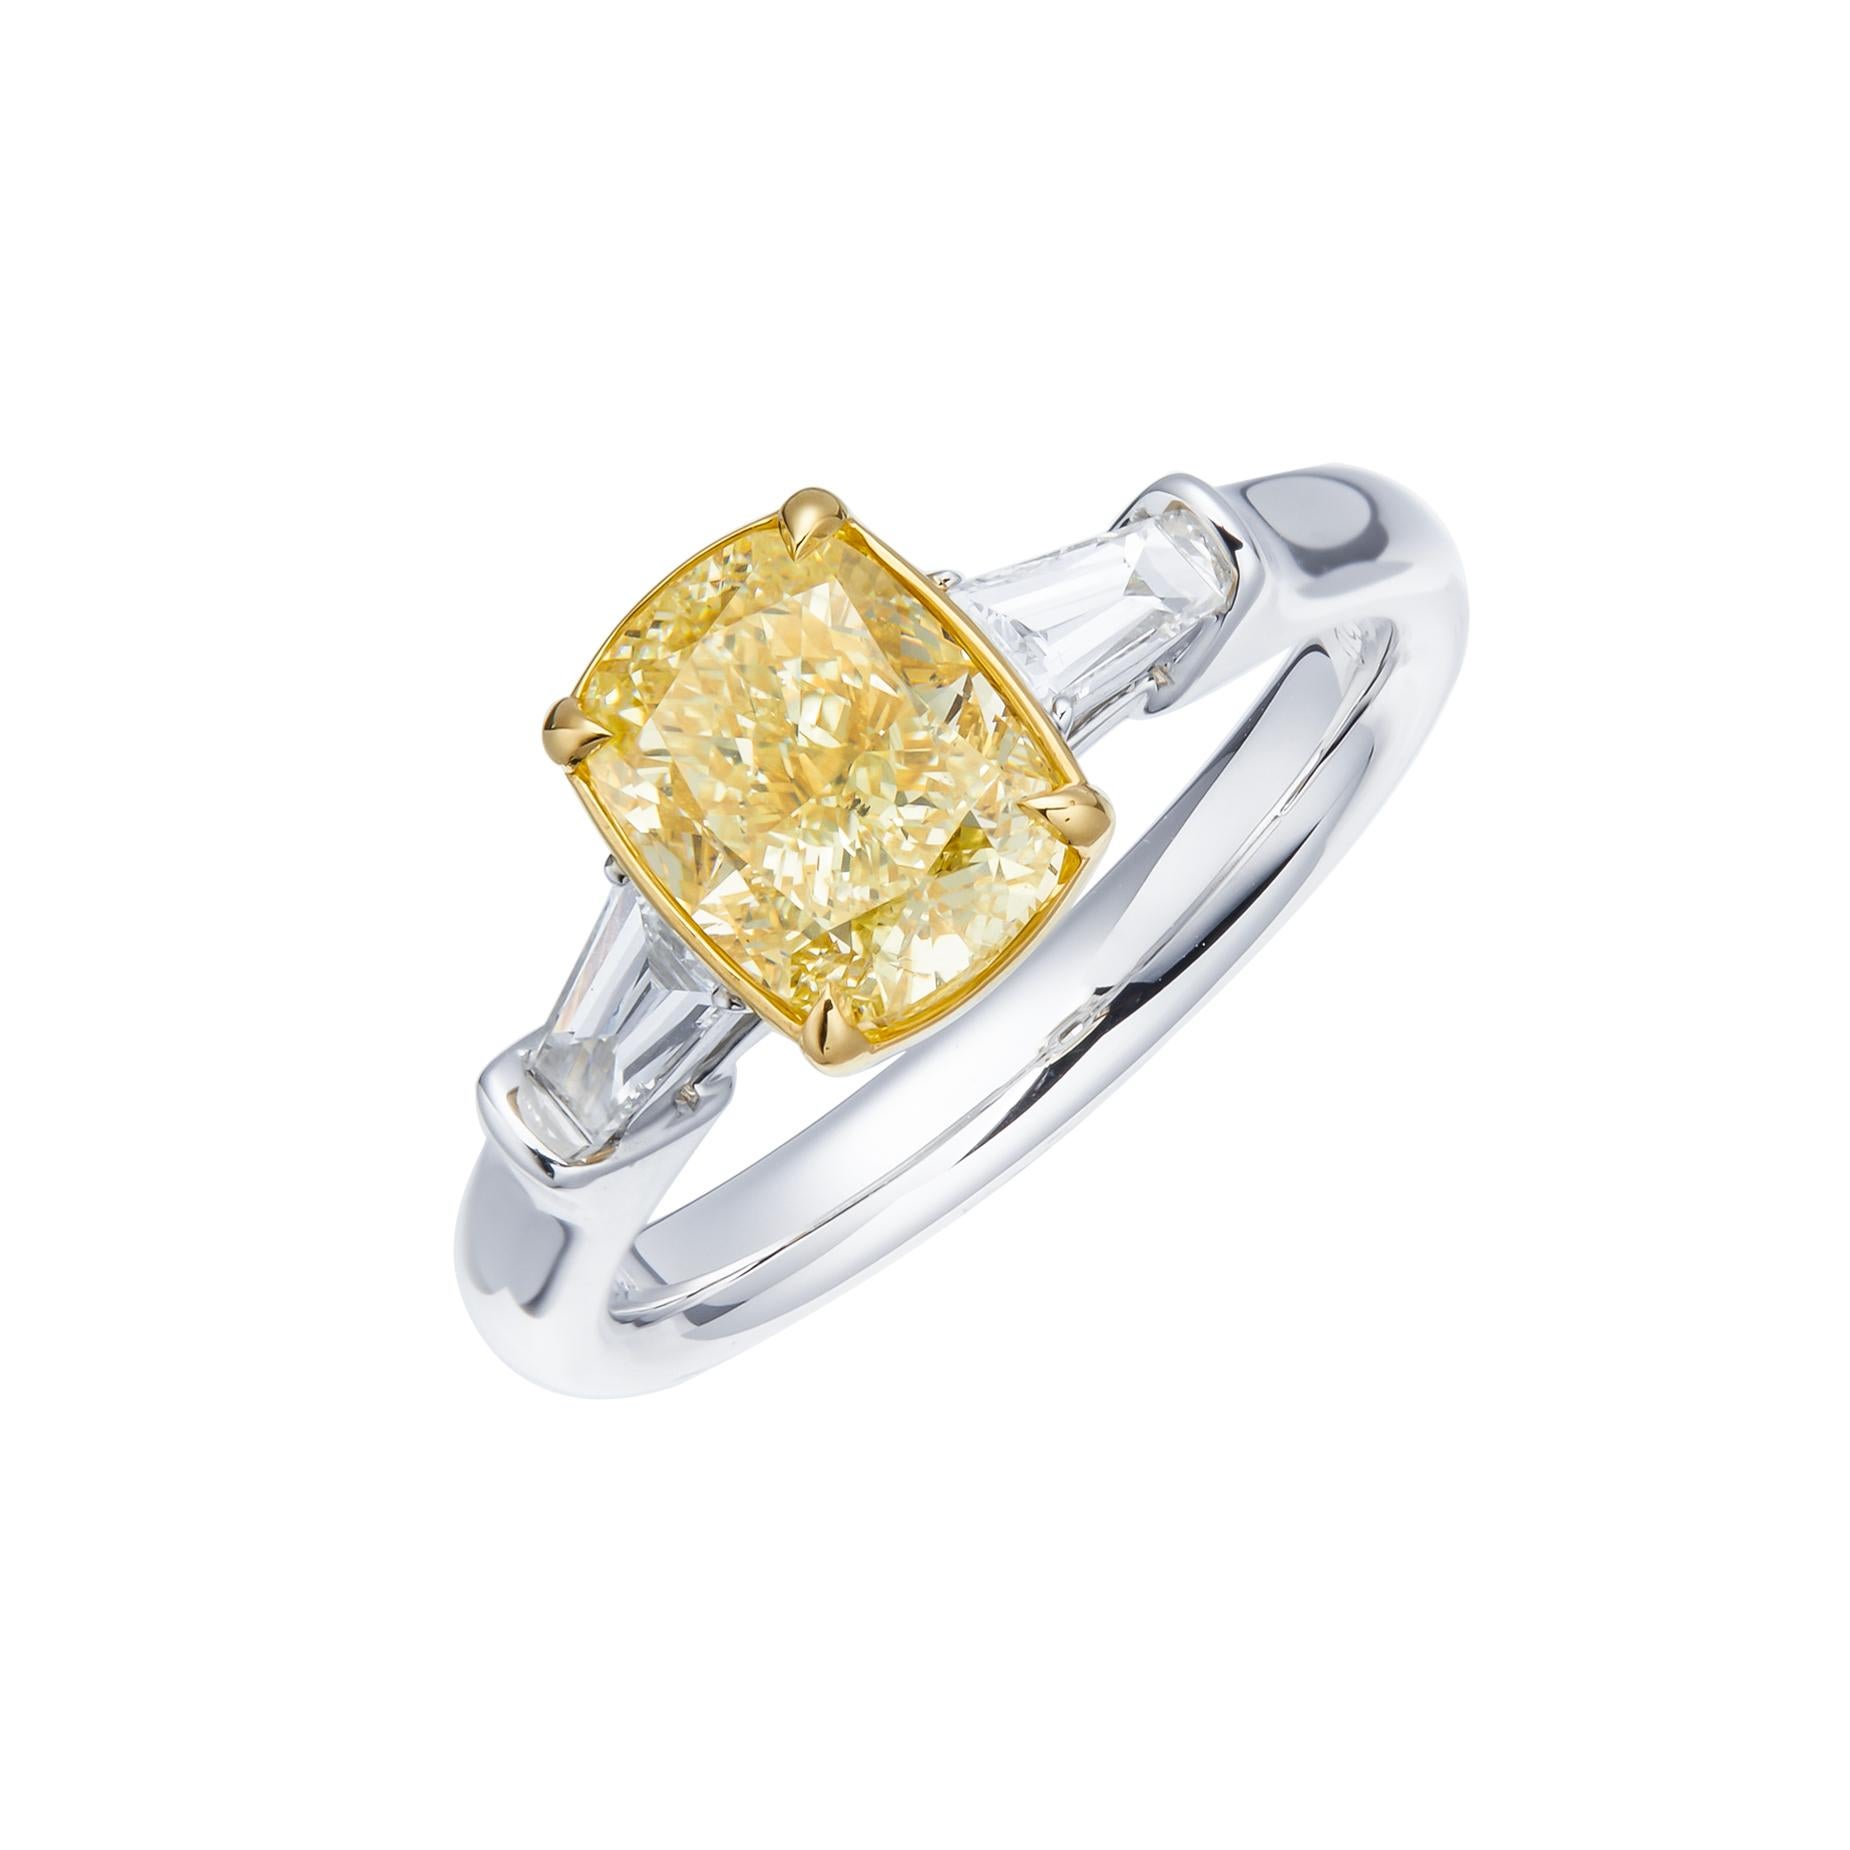 ntroducing a masterpiece of sophistication and timeless allure – a GIA Certified 2.02 carat U to V Range Natural Cushion Shape Diamond Solitaire Ring. This exquisite ring showcases the natural beauty of a cushion-cut diamond, capturing the essence